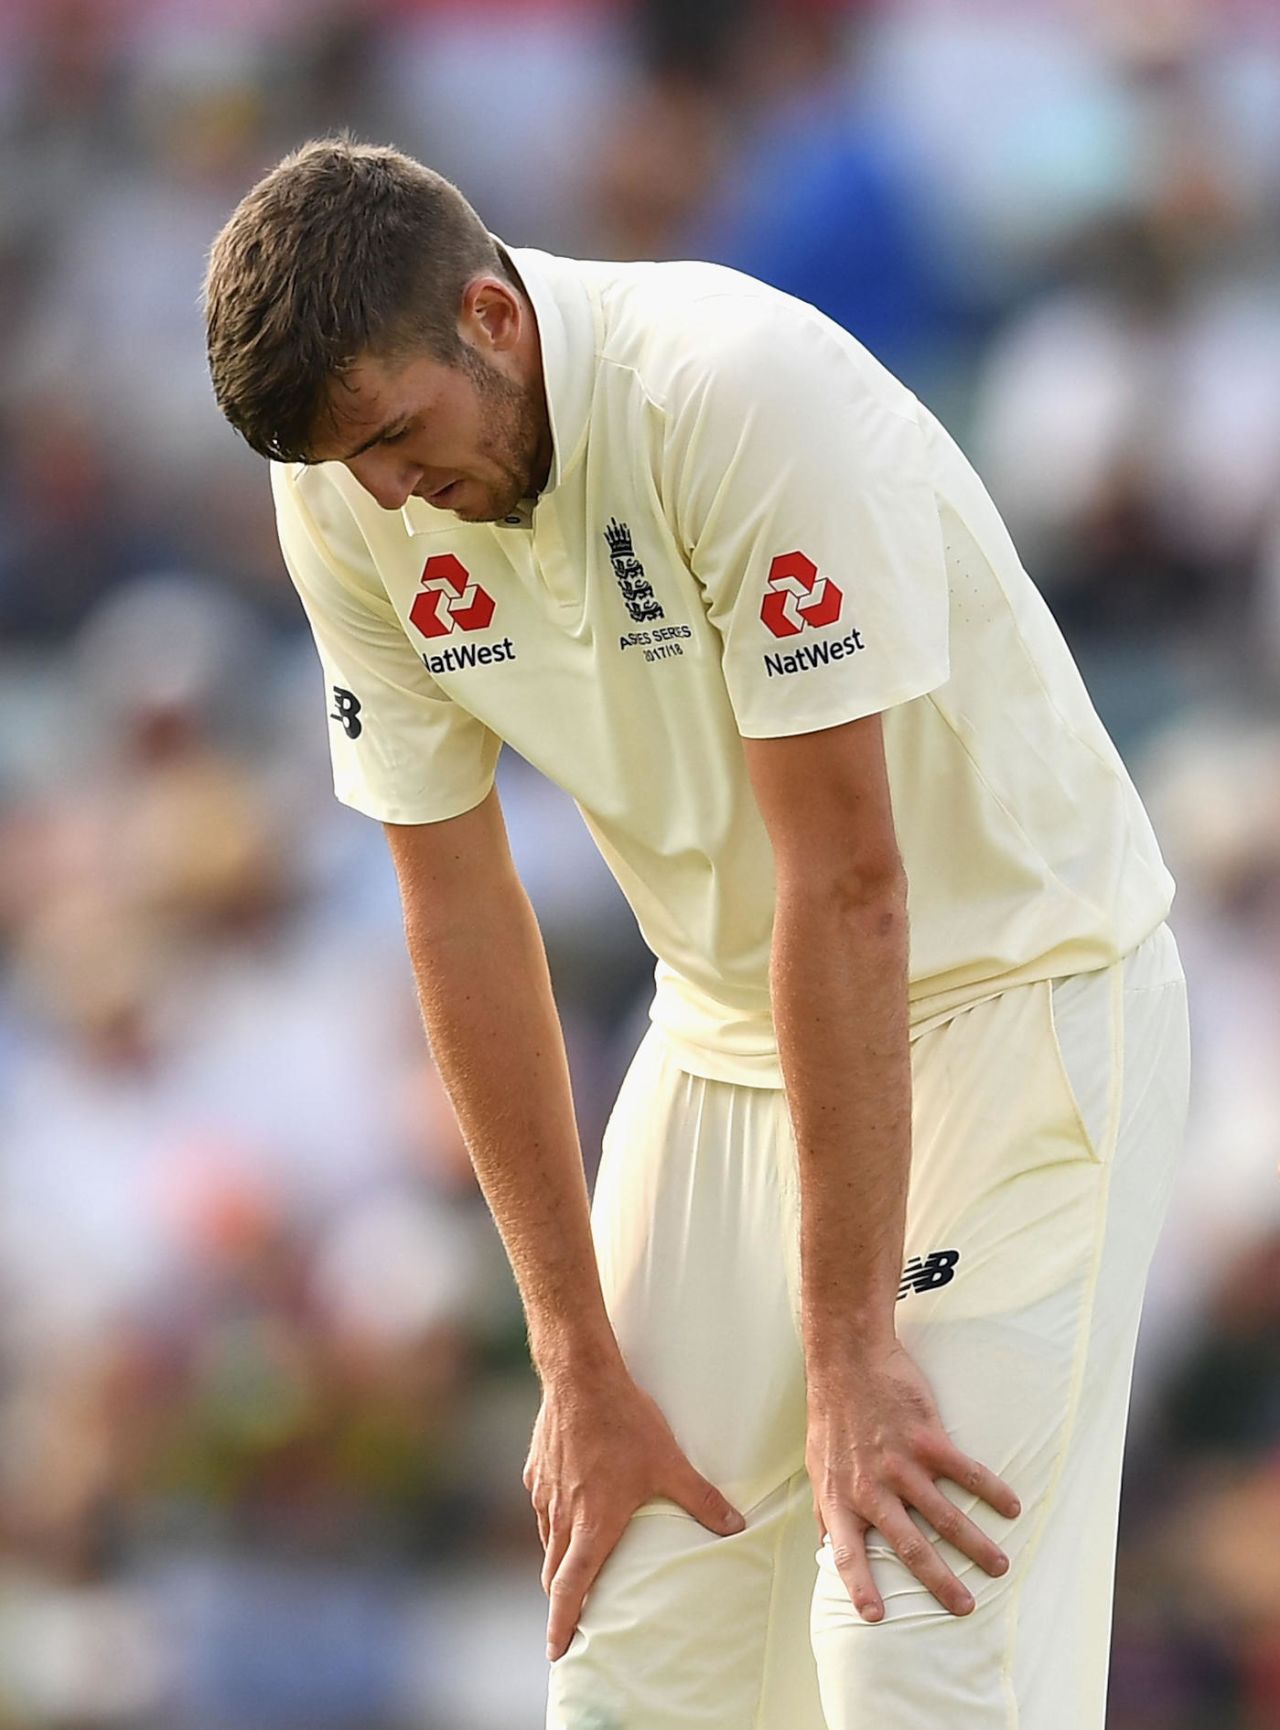 Craig Overton feels the pain of his cracked rib in the Perth Test, the WACA, December 15, 2017